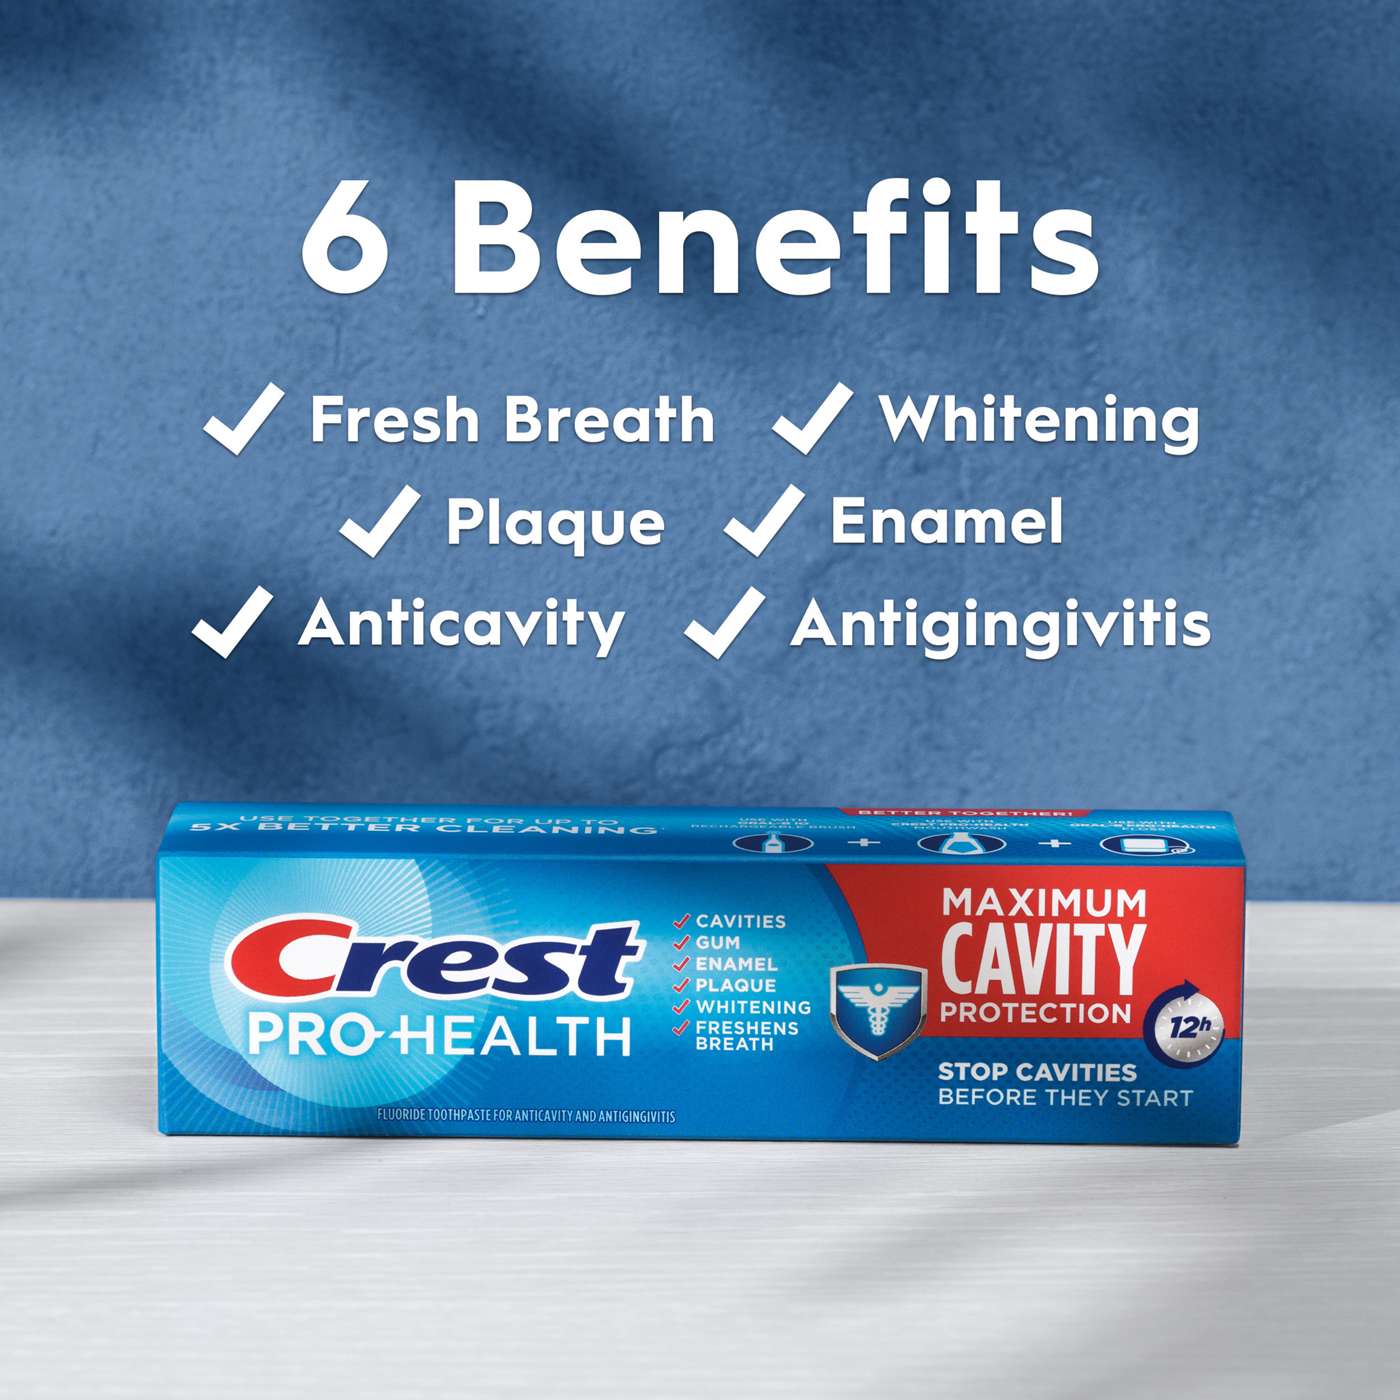 Crest Pro Health Maximum Cavity Protection Toothpaste; image 2 of 5